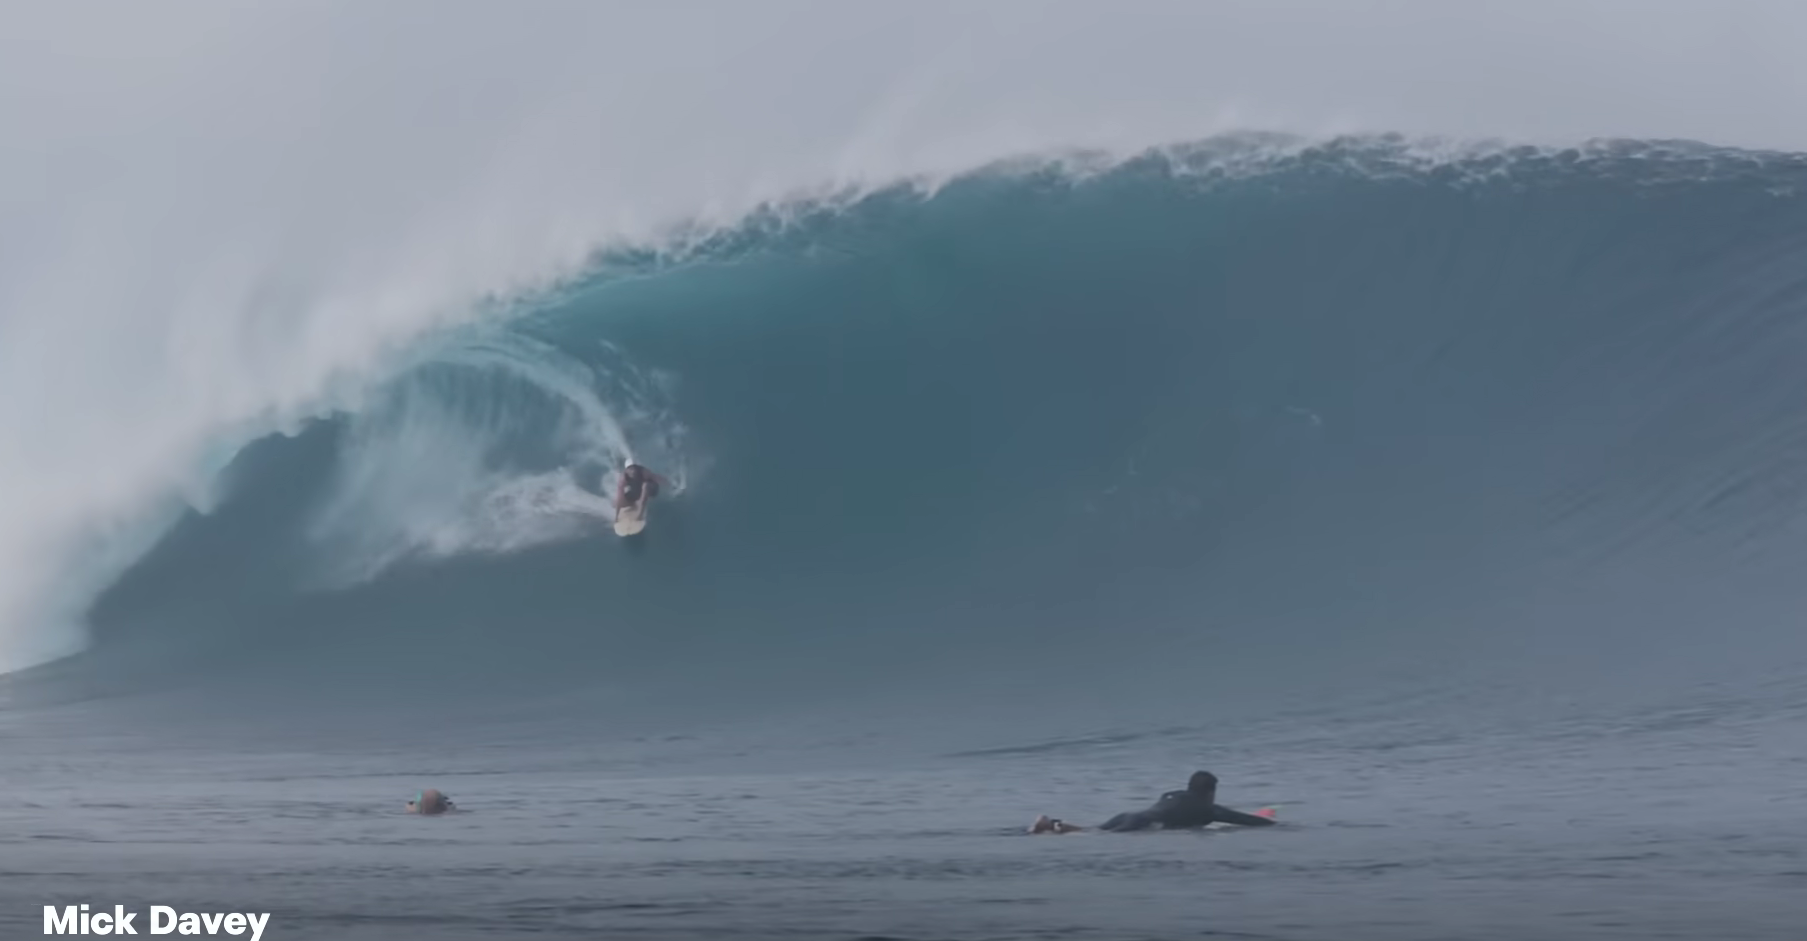 Picture of Mick Davey in the barrel at Cloudbreak, Fiji on his Rusty Surfboard